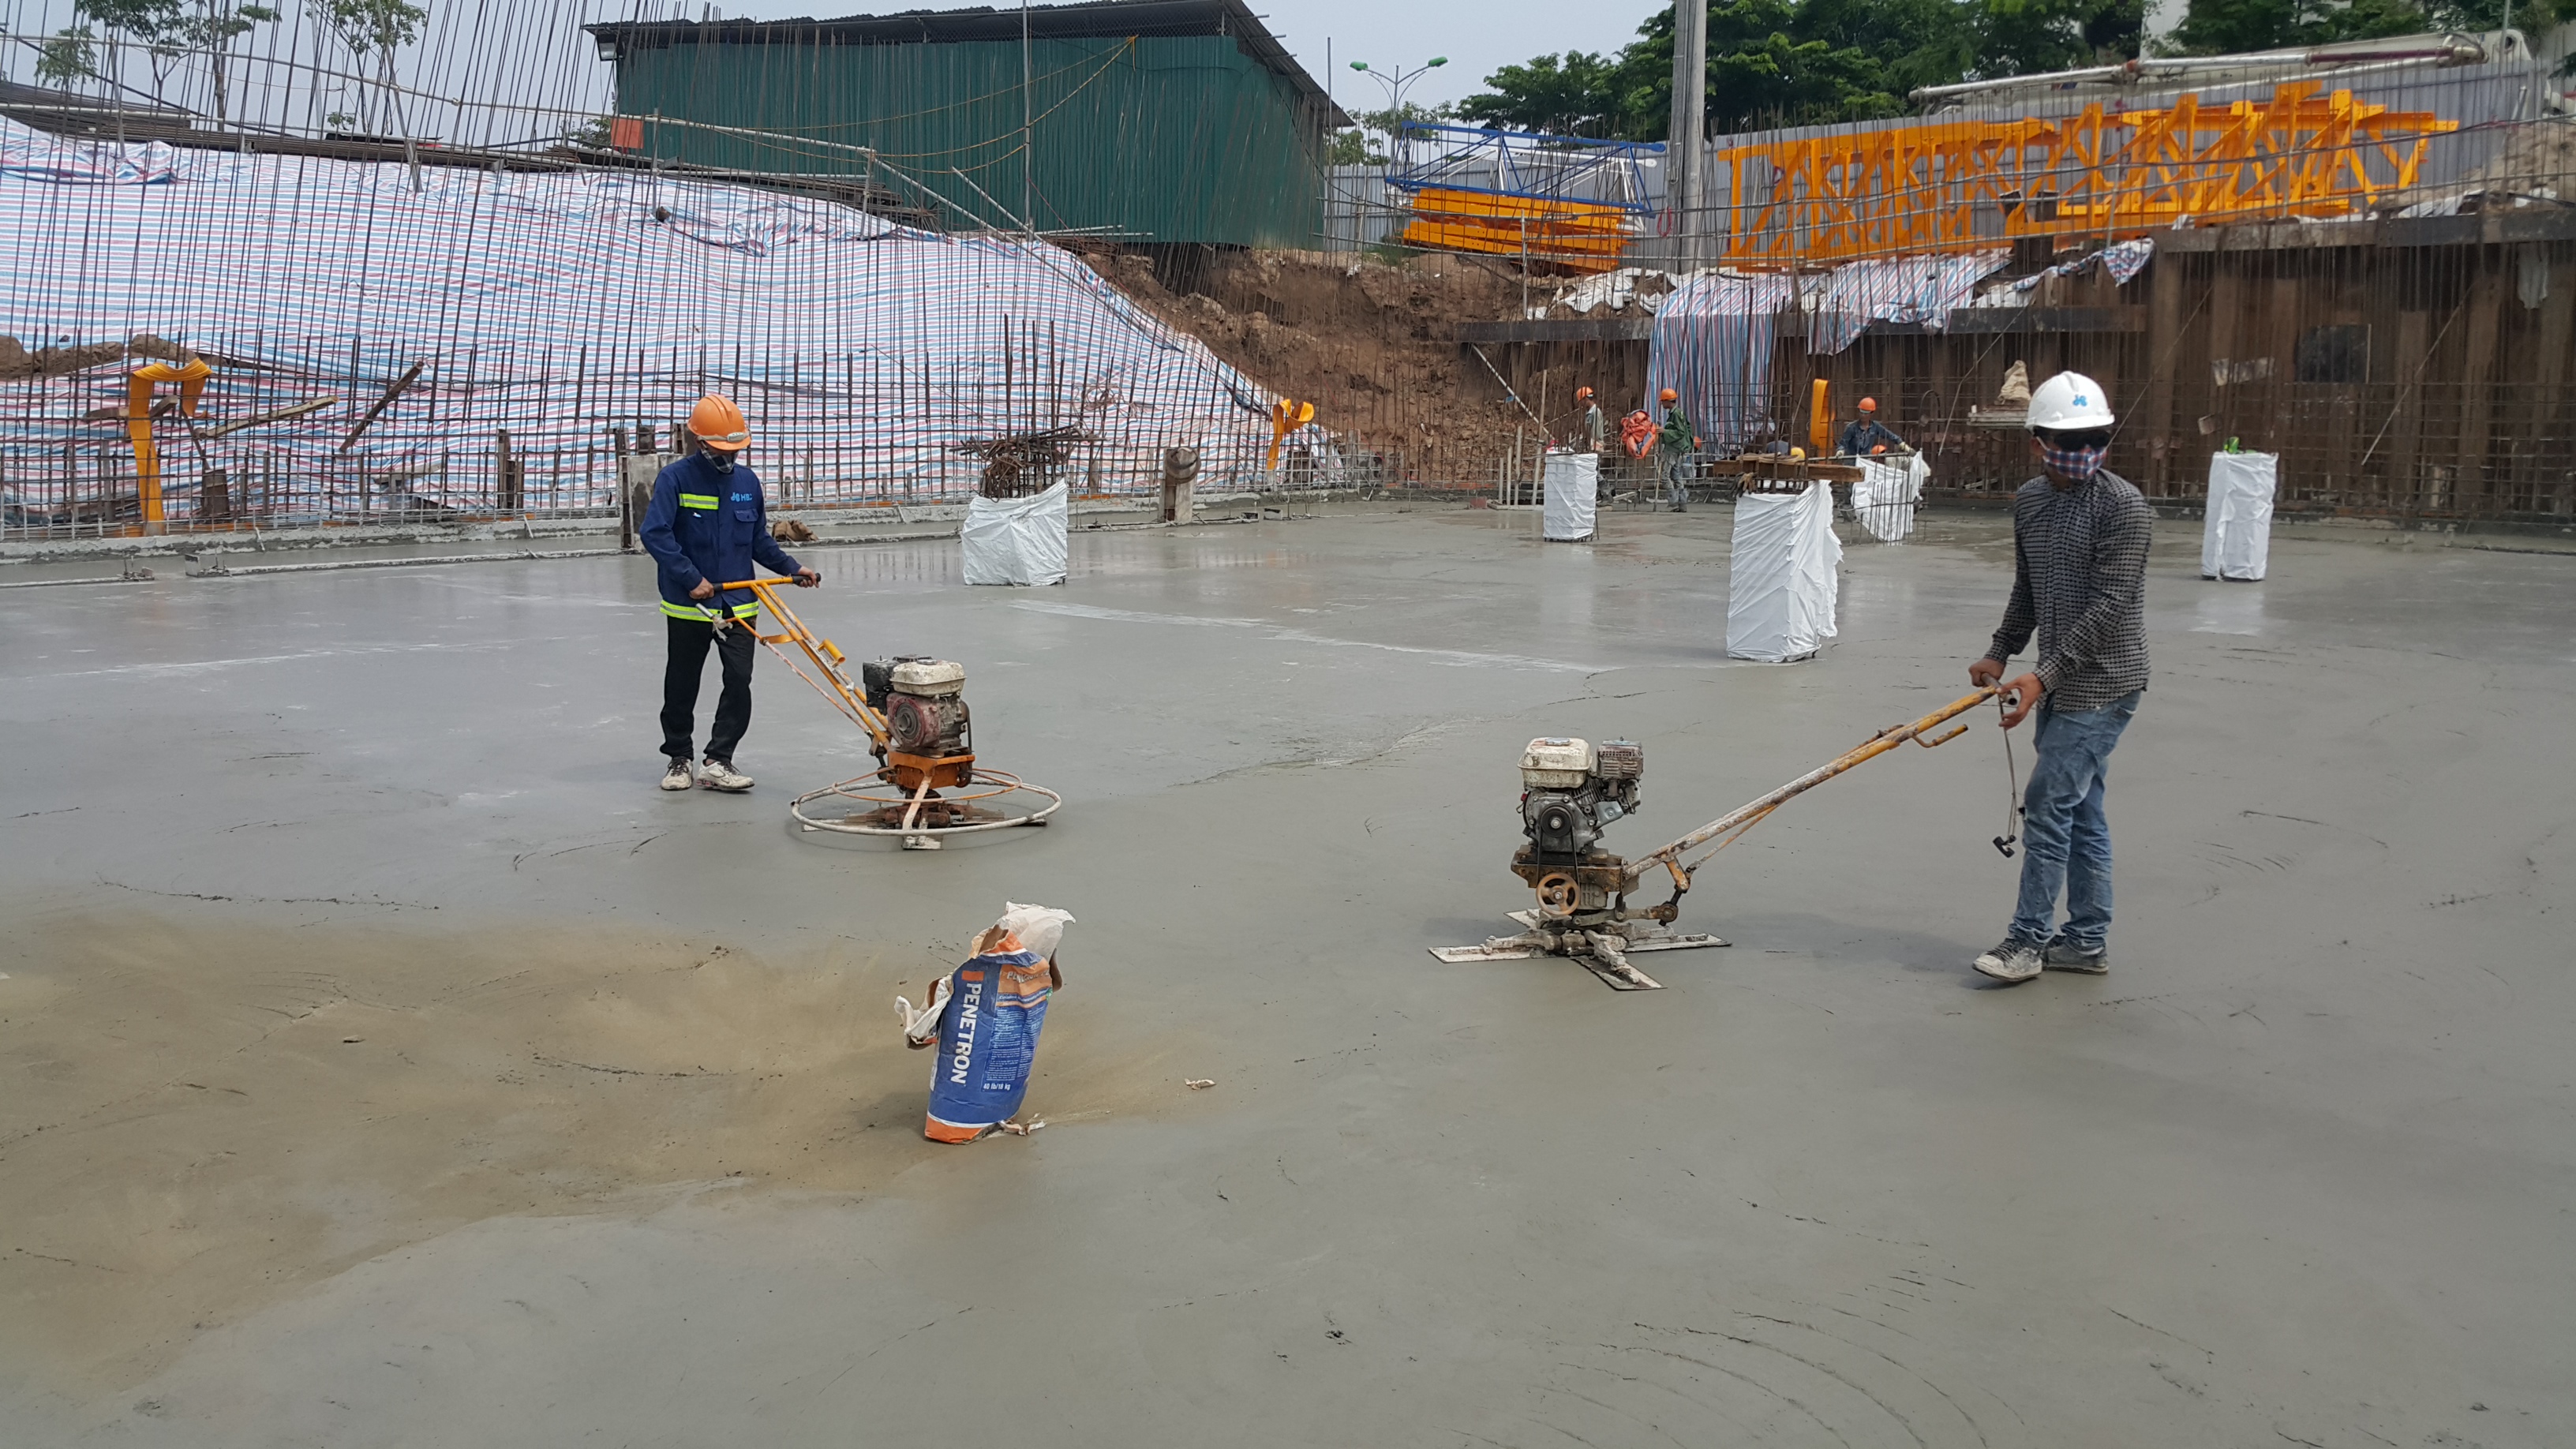 PENETRON goes to work: After an initial dry shake application, PENETRON PLUS will give greater impact and abrasion resistance to the concrete substrate at An Binh City, Hanoi.